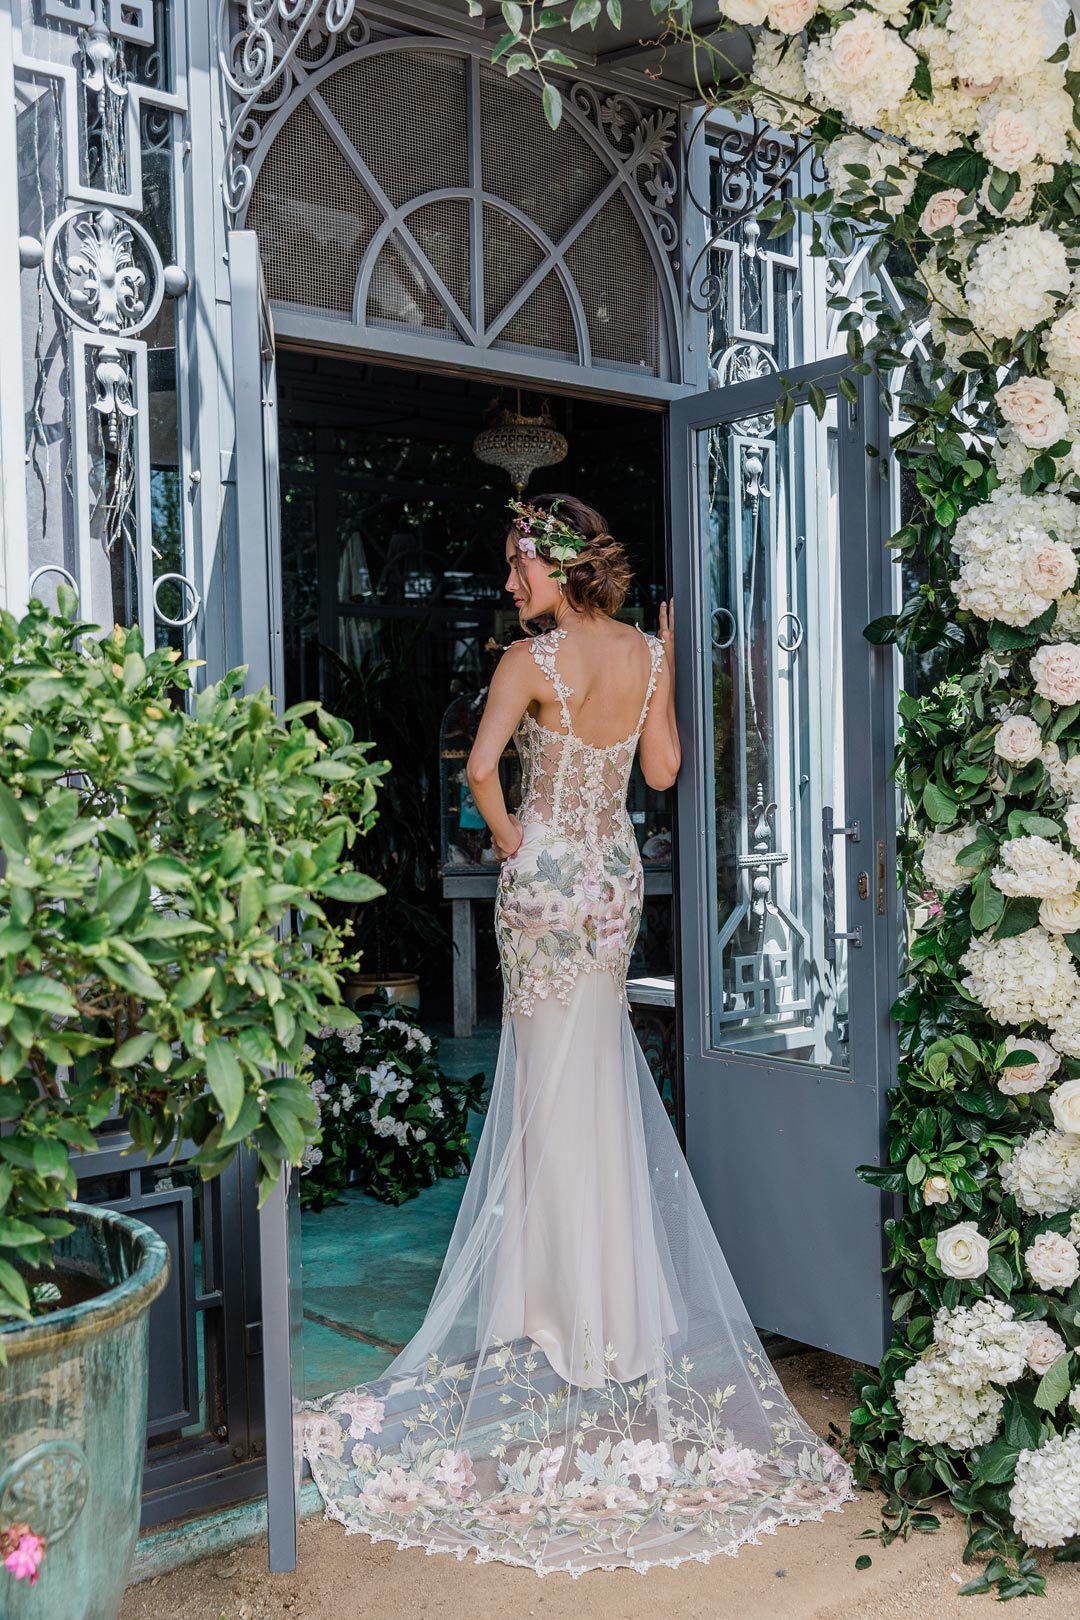 Colorful Wedding Dresses with elaborate floral wedding train custom design by Claire Pettibone